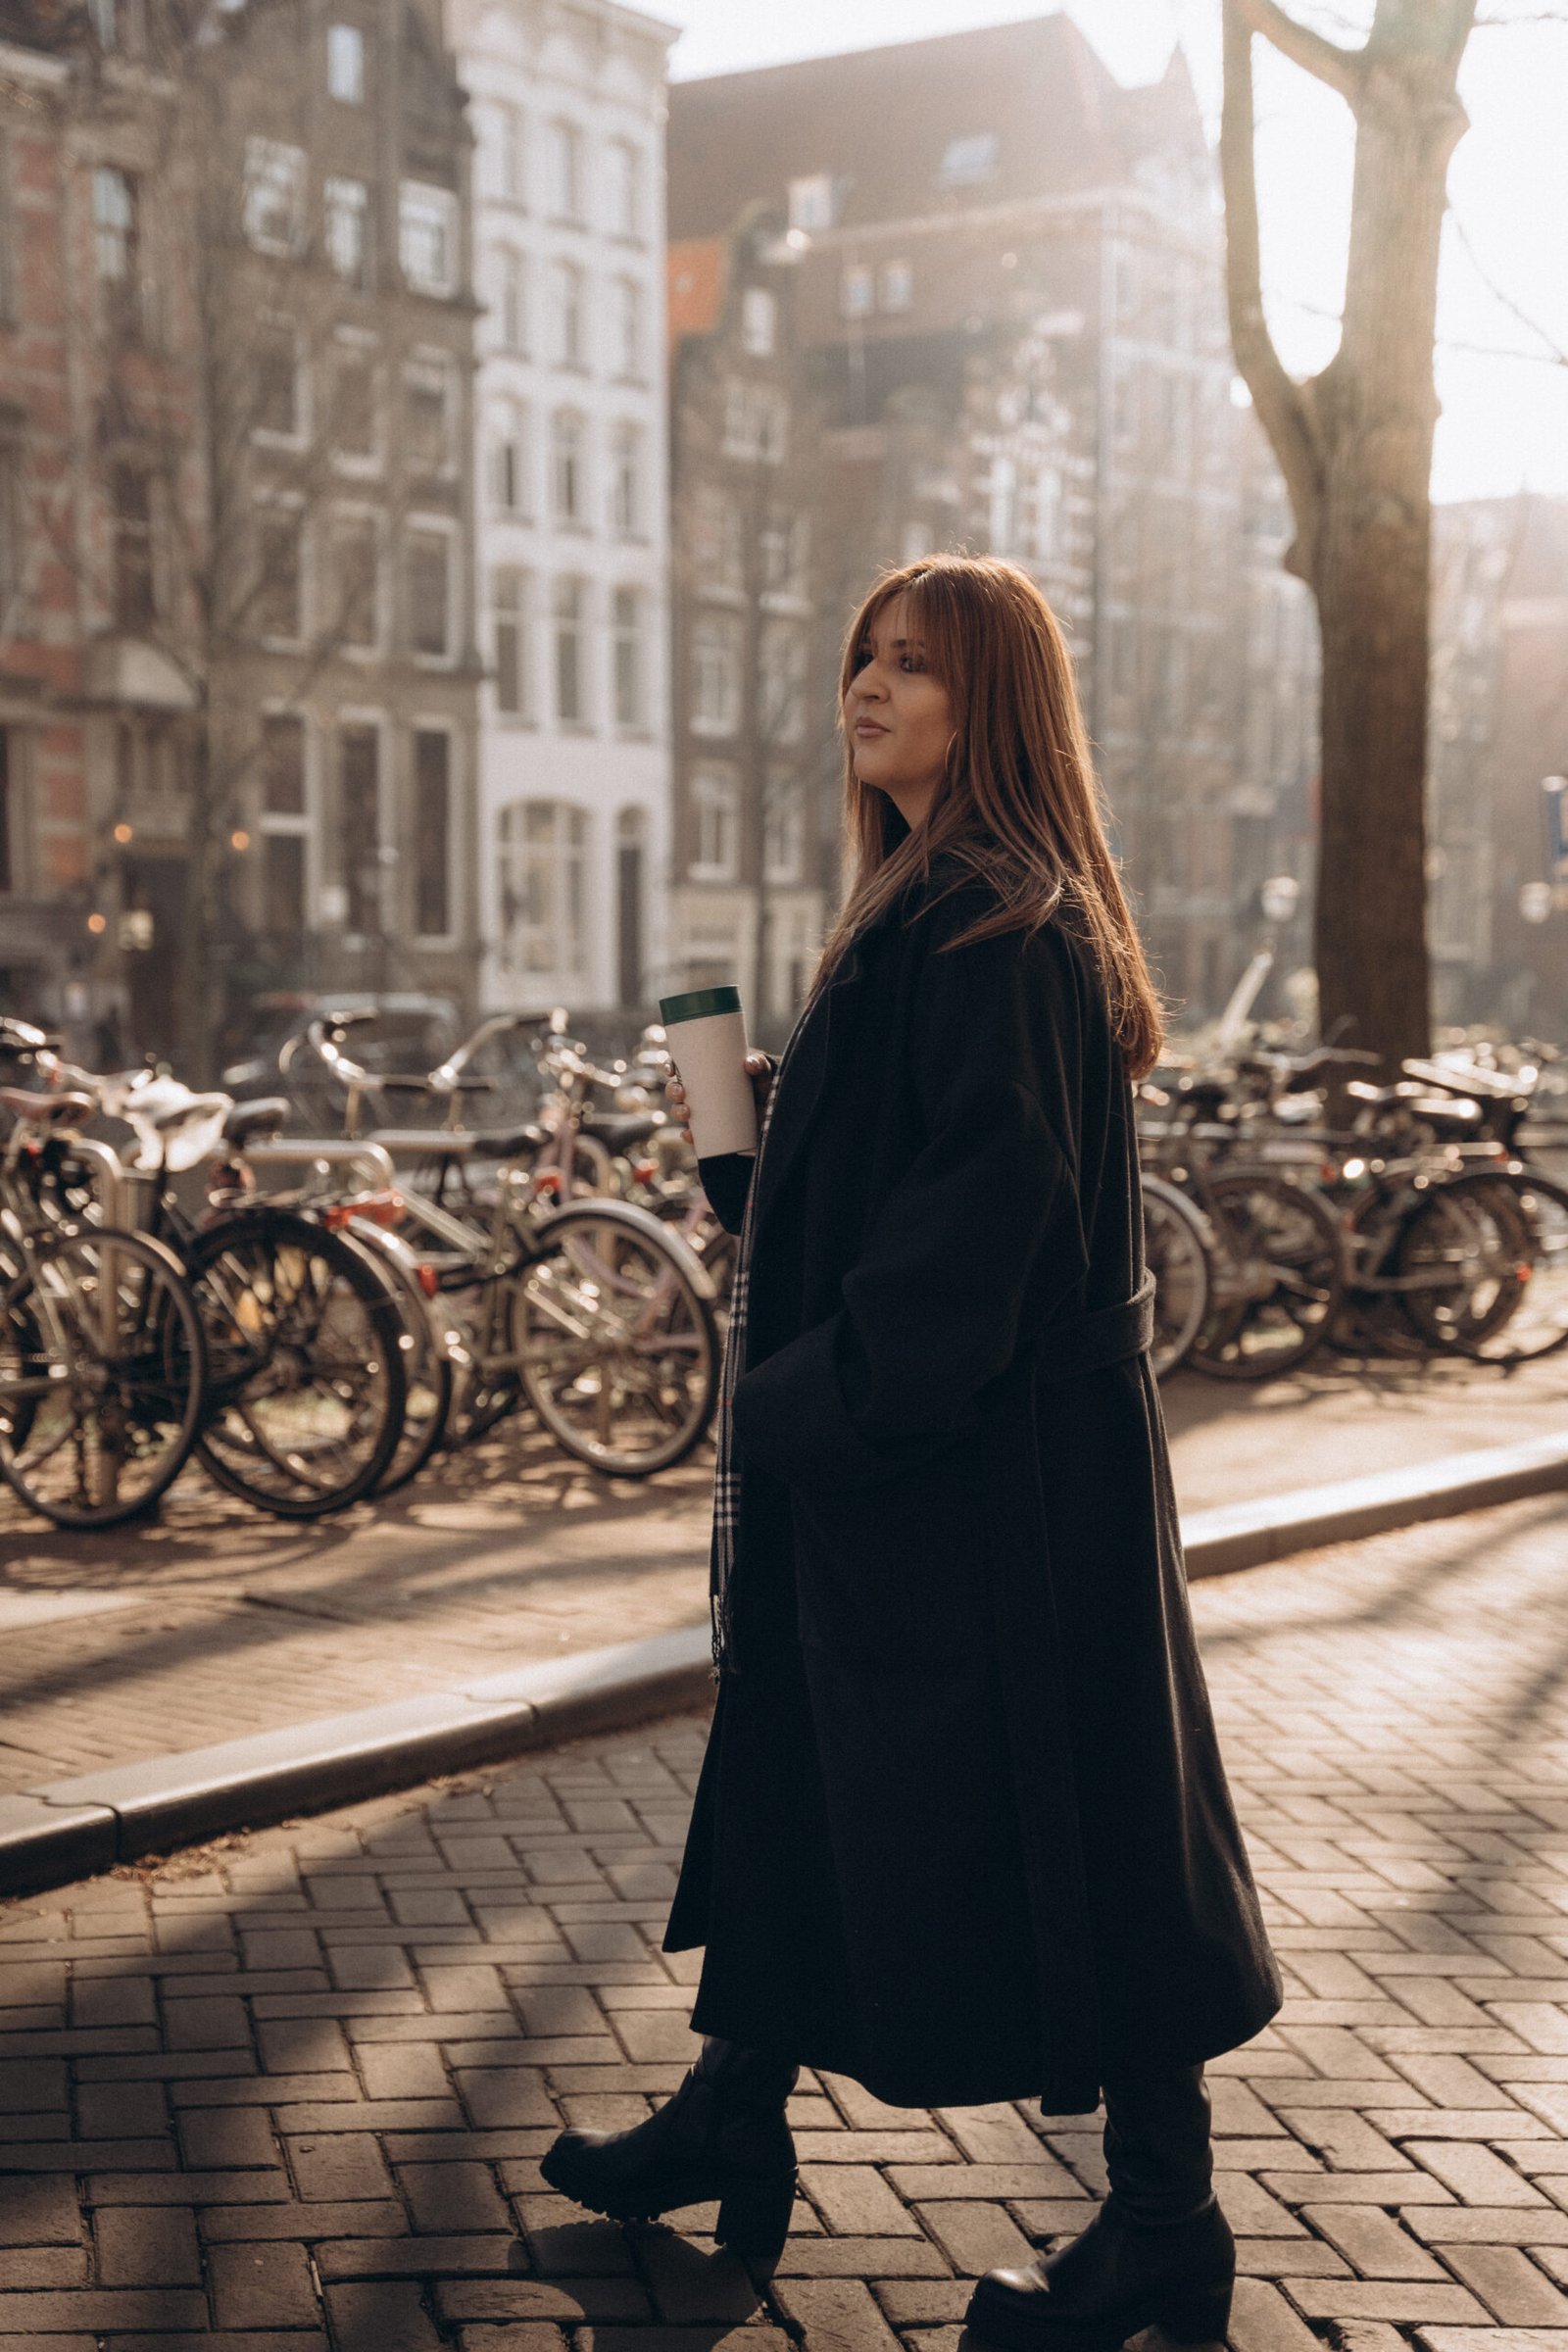 Discover Amsterdam Photoshoot